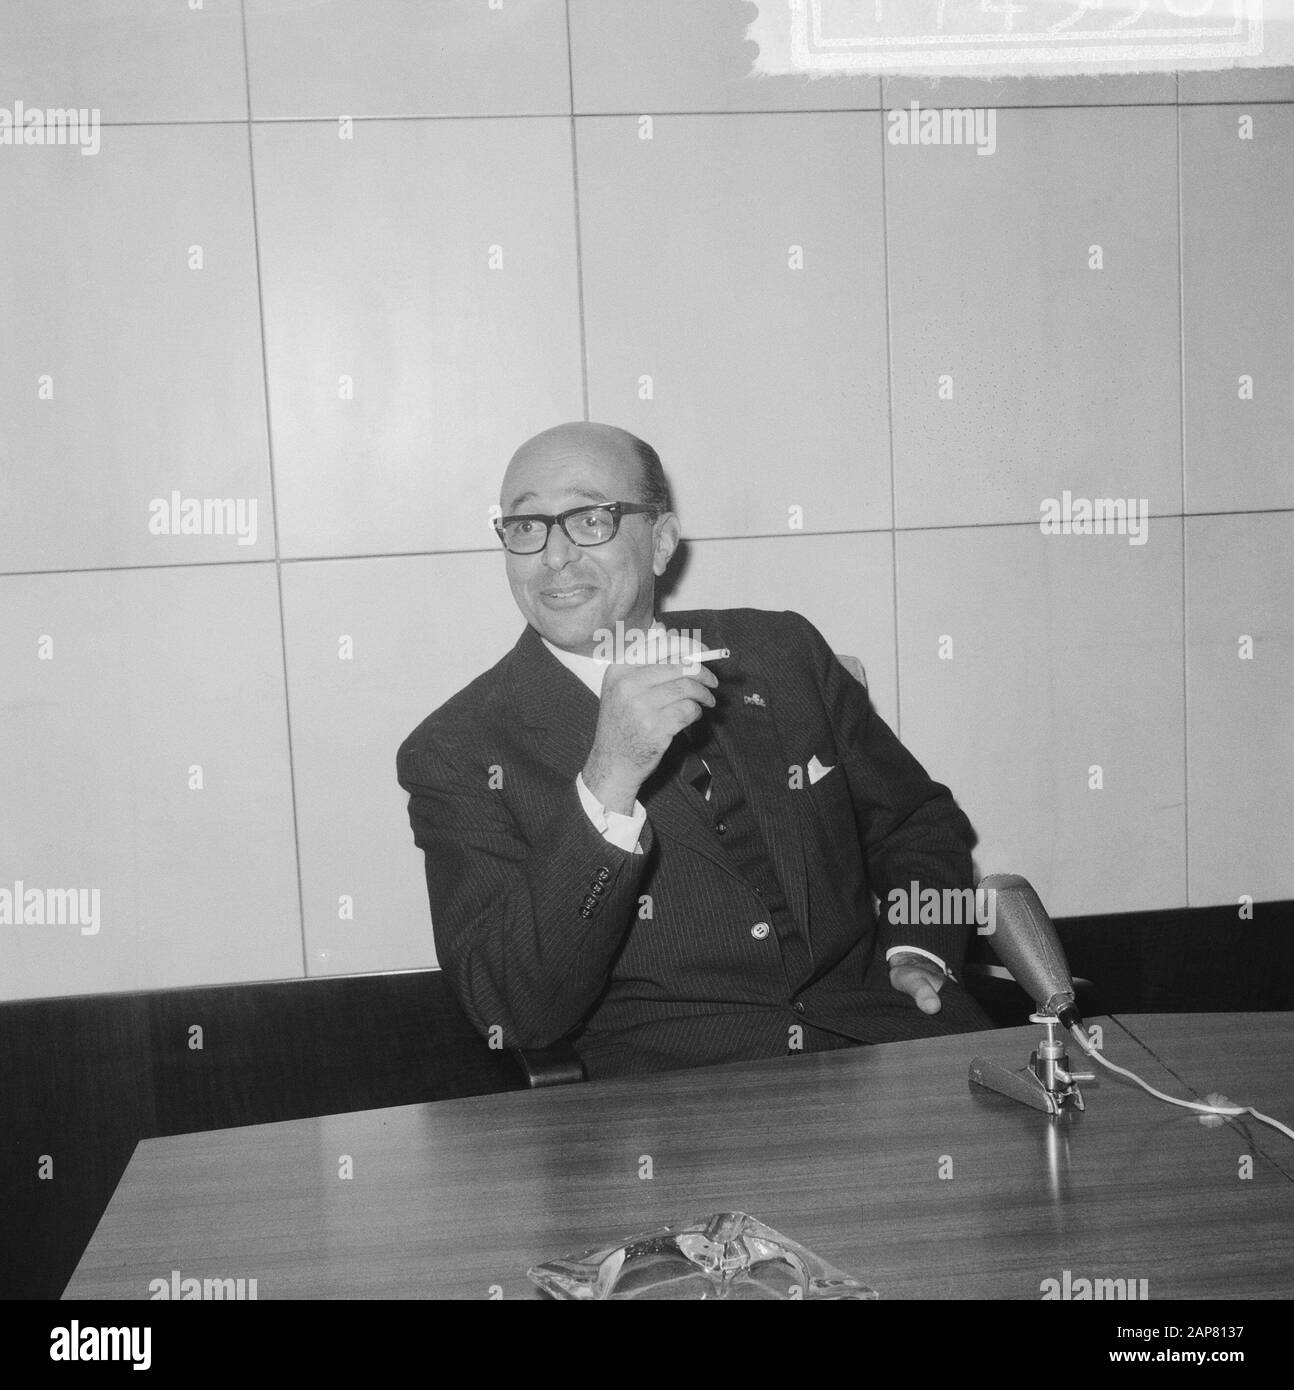 Arrival of mr. De Vries, the newly appointed governor of Suriname at Schiphol Airport. He will be sworn in in the Netherlands. During press conference Date: 15 February 1965 Location: Noord-Holland, Schiphol Keywords: arrivals, governors, overseas territories, press conferences Stock Photo